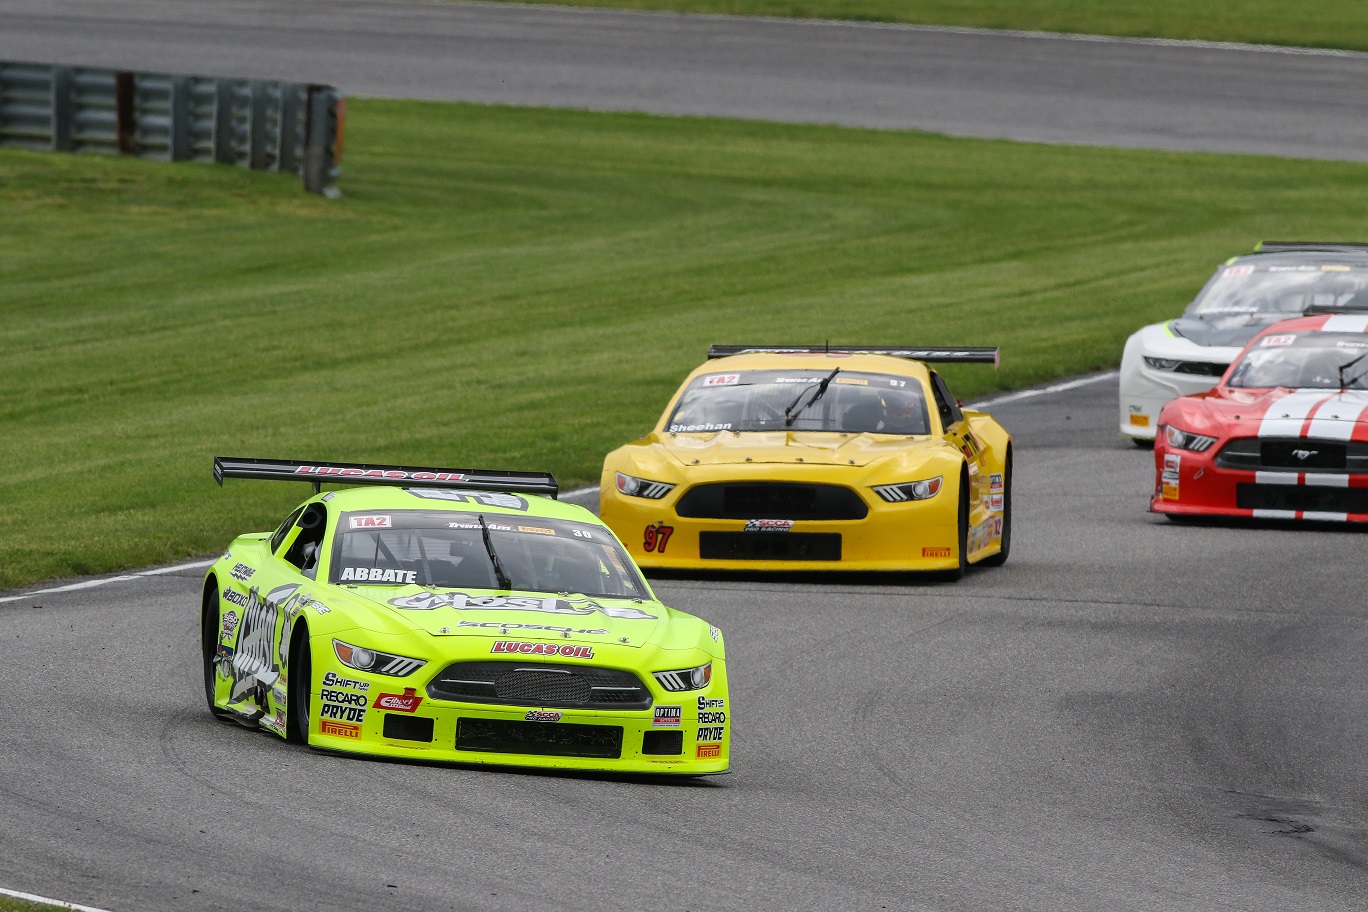 Michele Abbate leading into the corner at Lime Rock Park